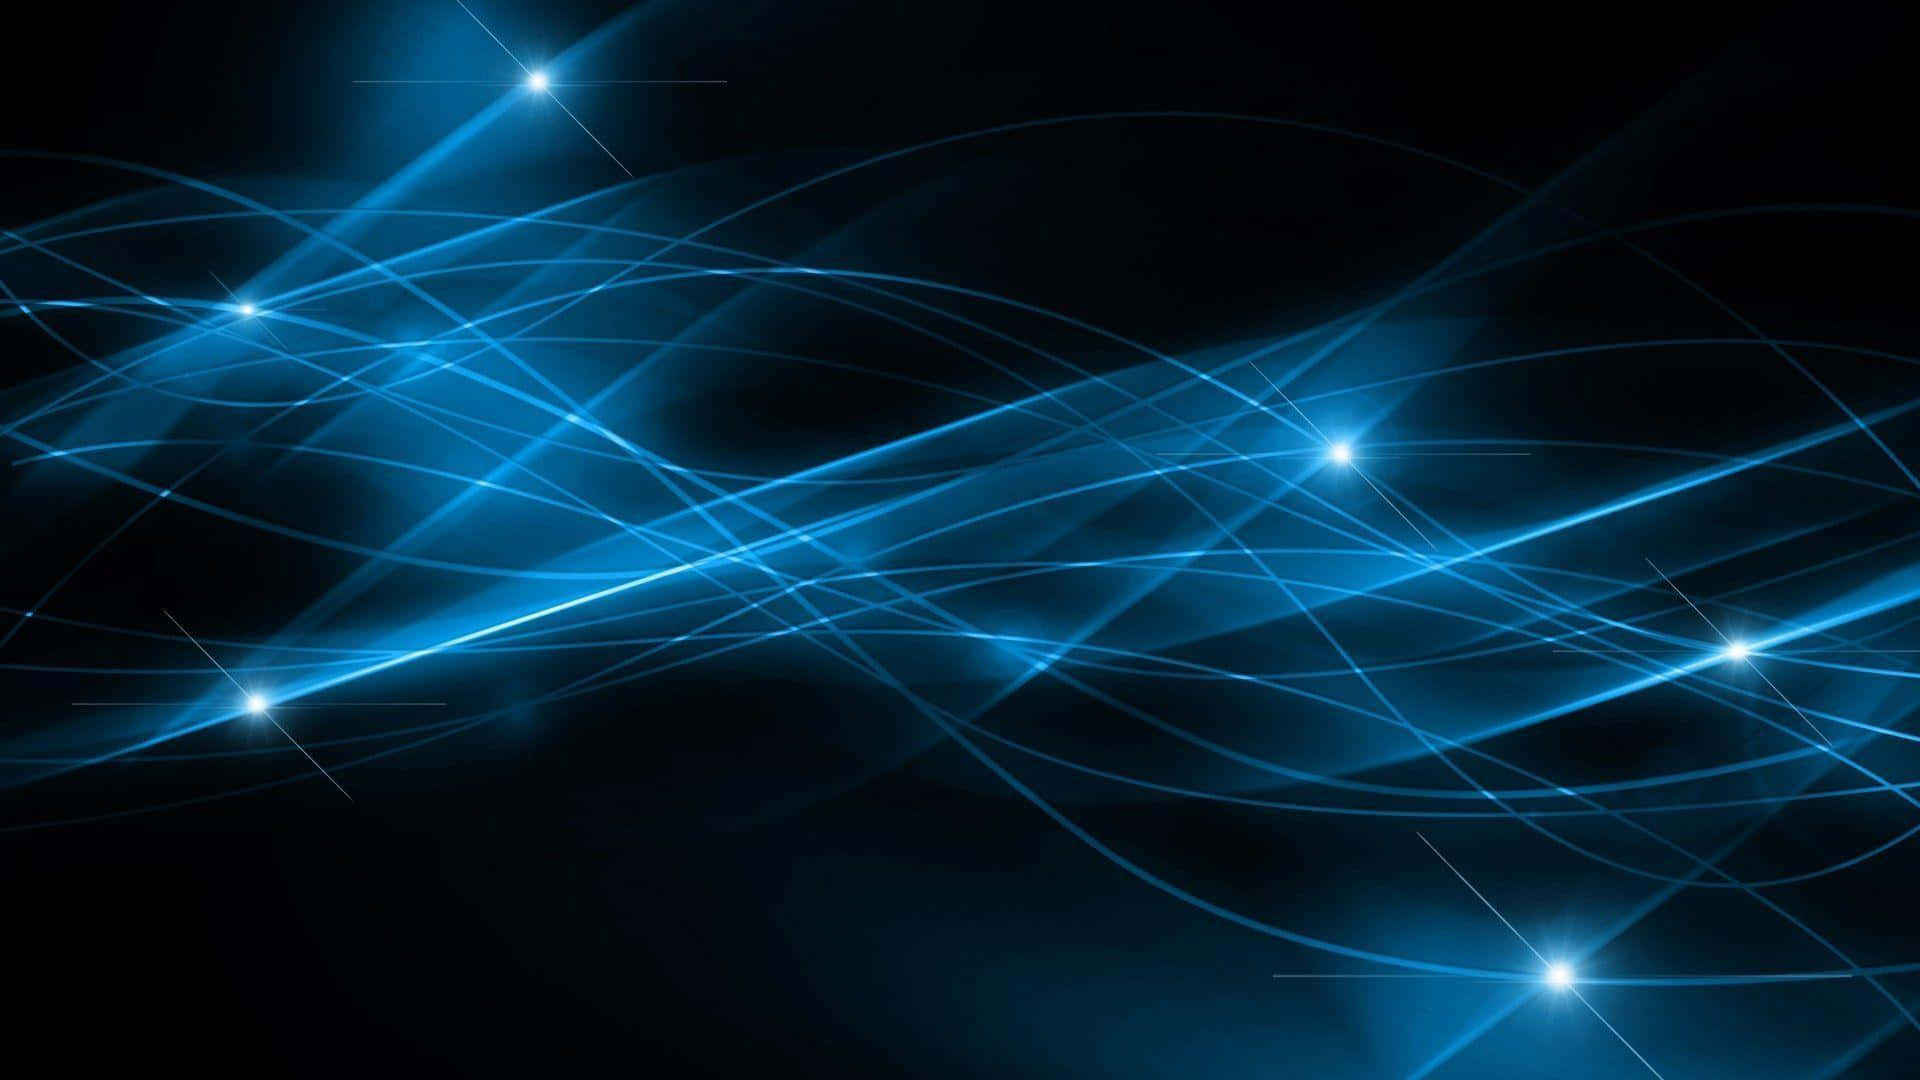 Abstract Wave Lights Blue And Black Background